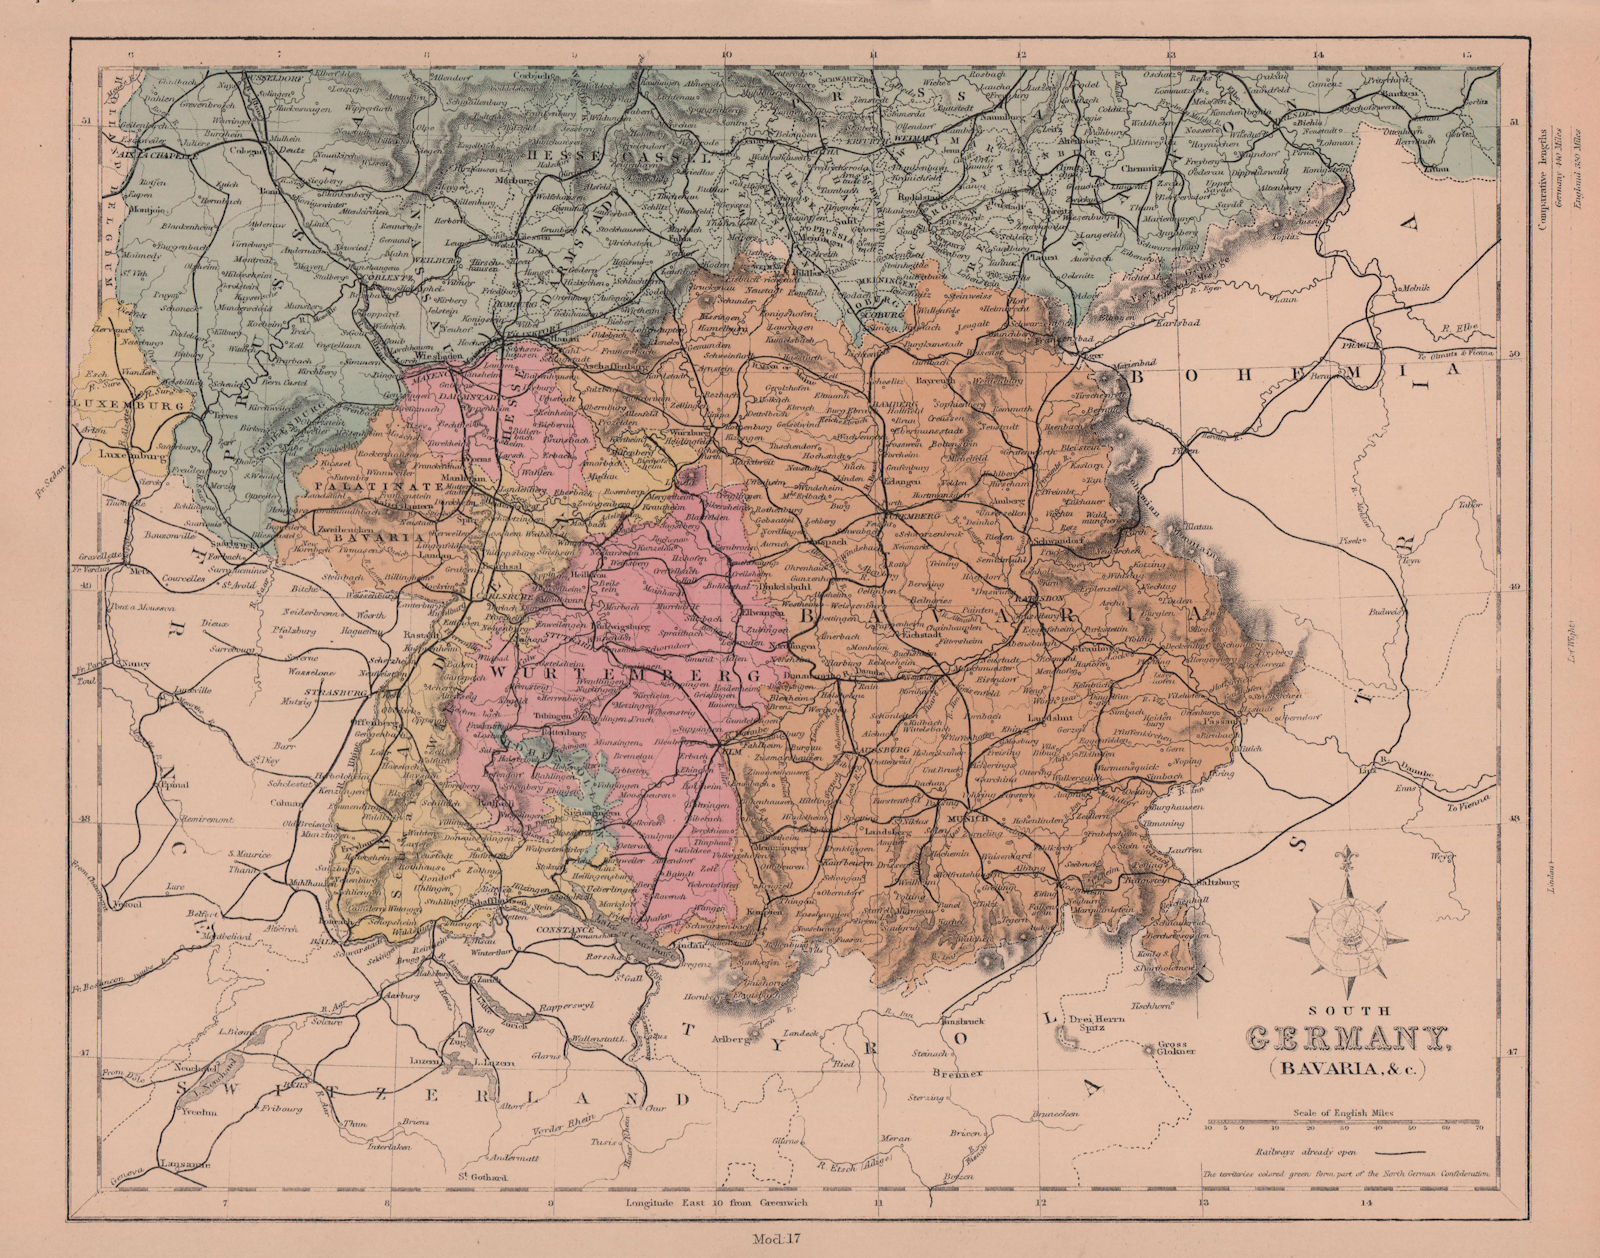 Associate Product South Germany. Bavaria & Württemberg. Railways. HUGHES 1876 old antique map